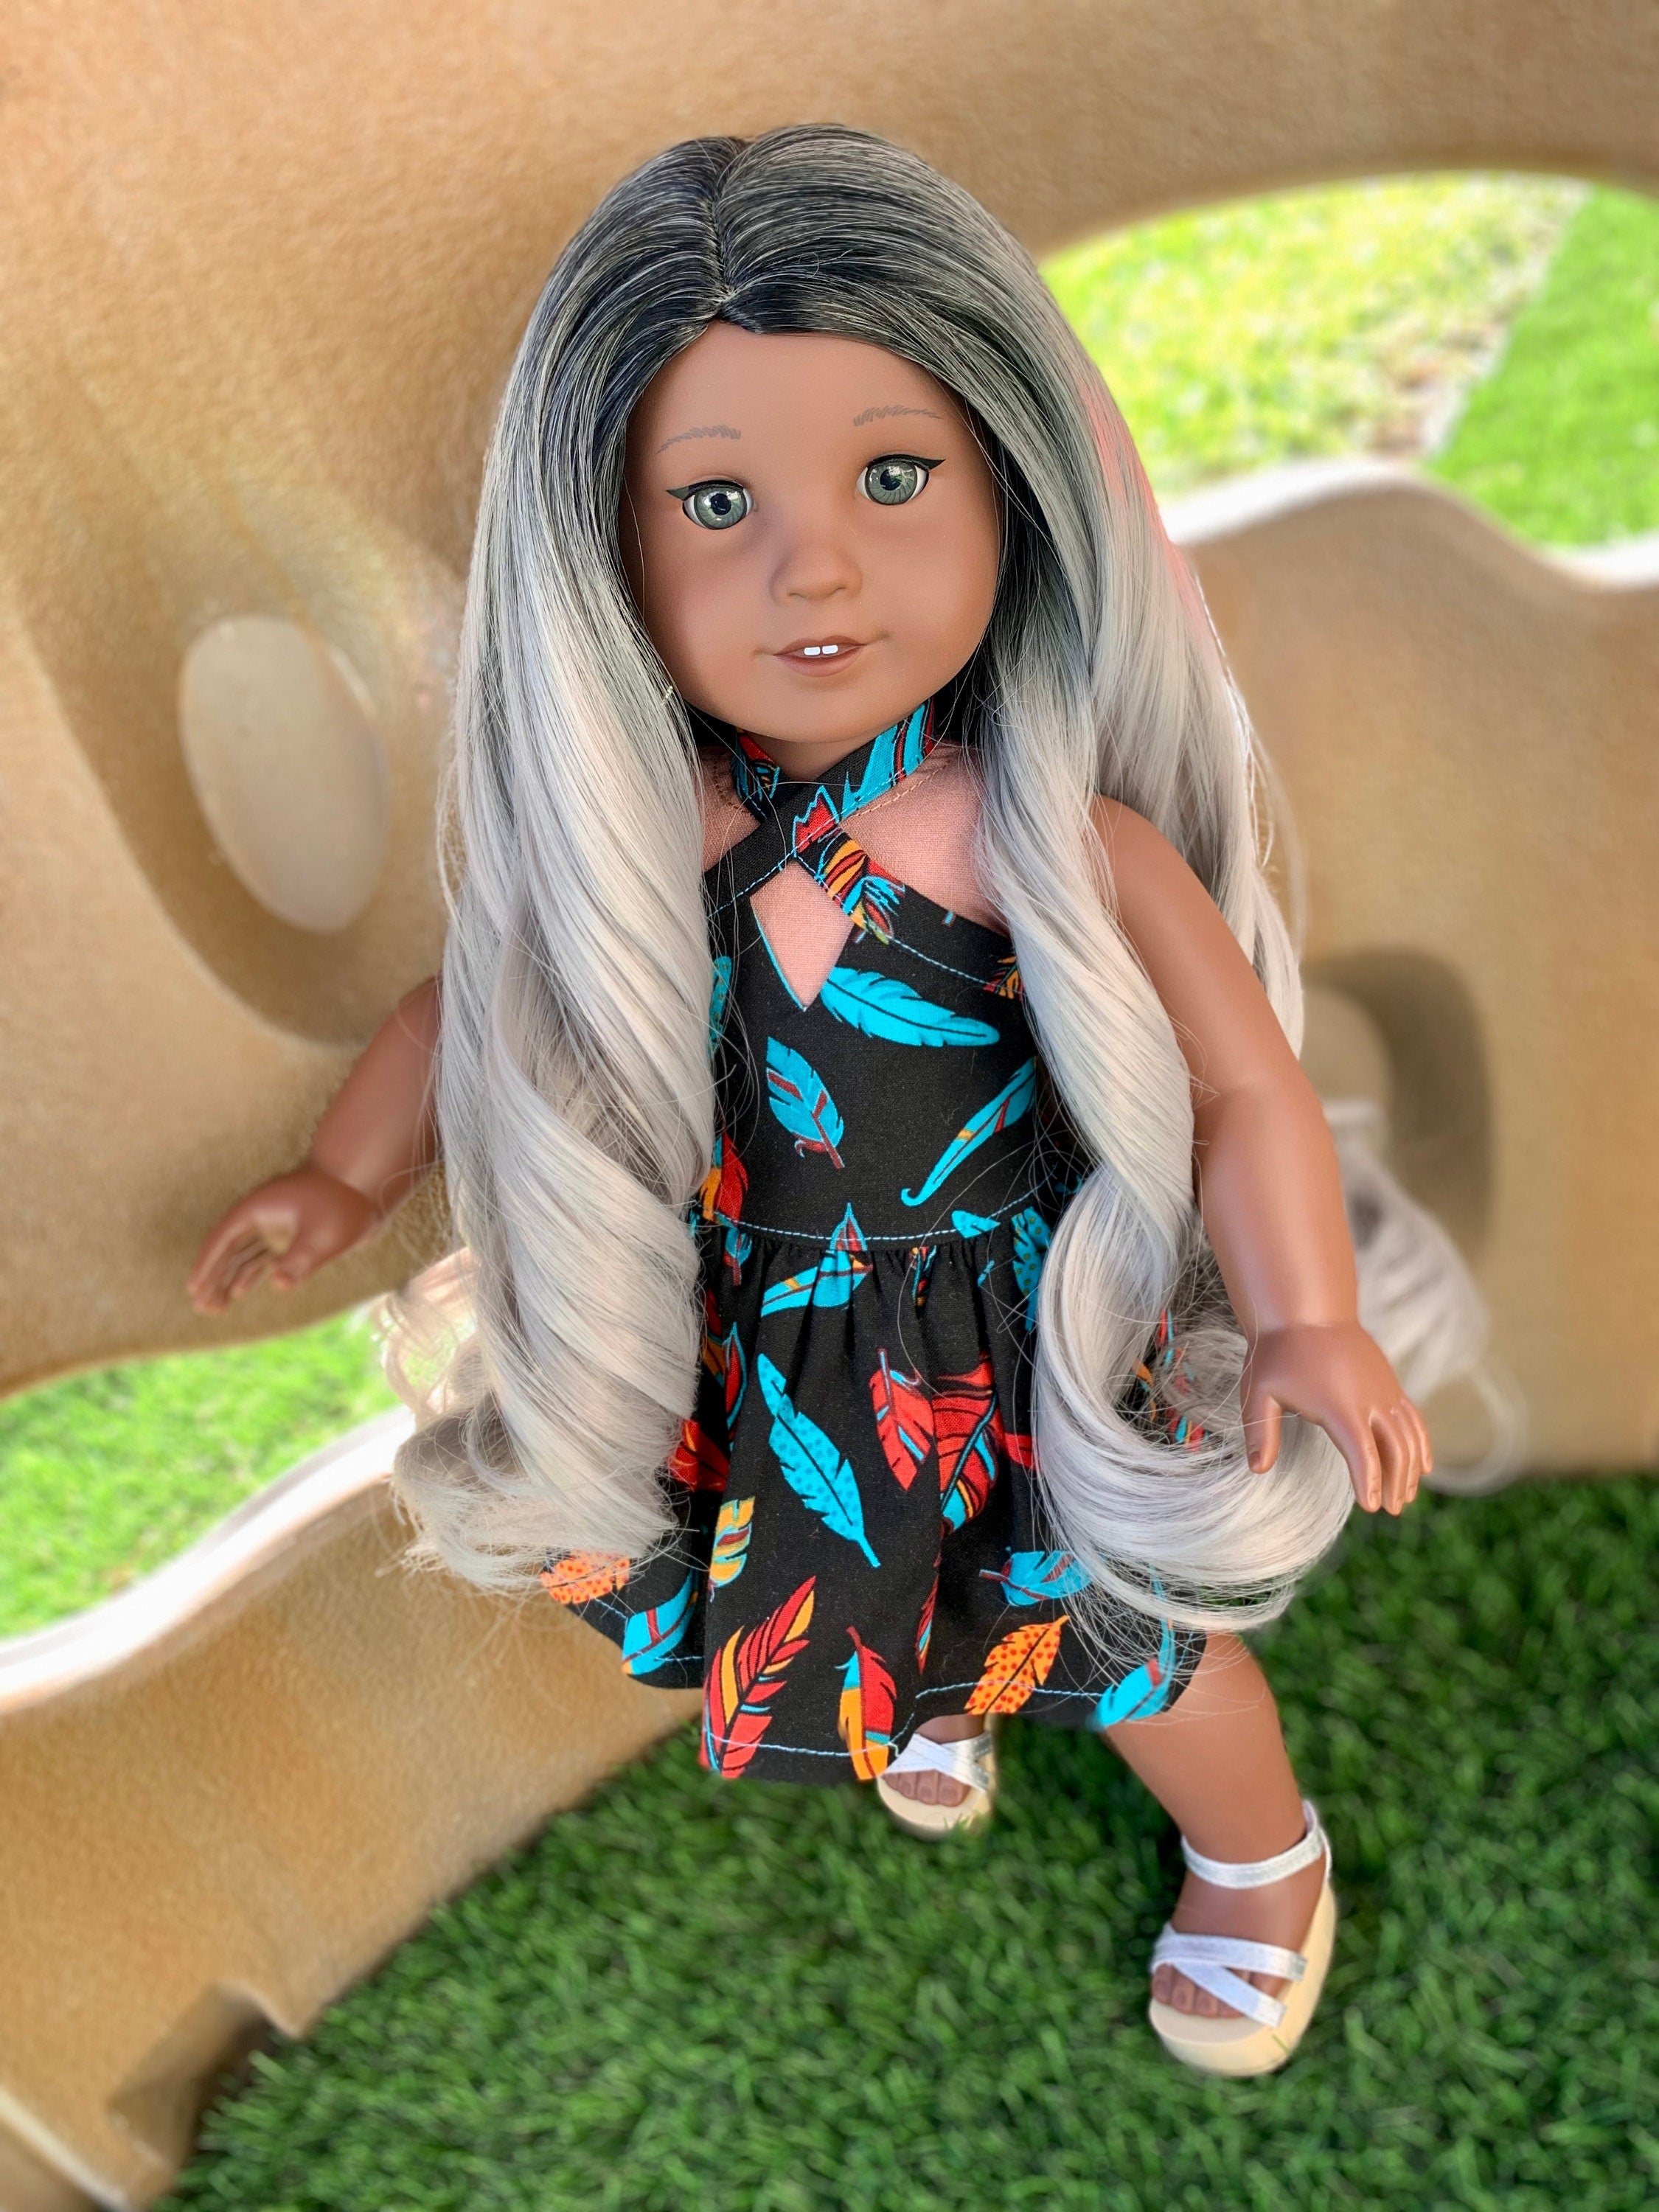 Custom DYED OMBRE Doll Wig for 18" American Girl Doll Heat Safe Tangle Resistant - fits 10-11" head size of all 18" dolls black  grey ombre